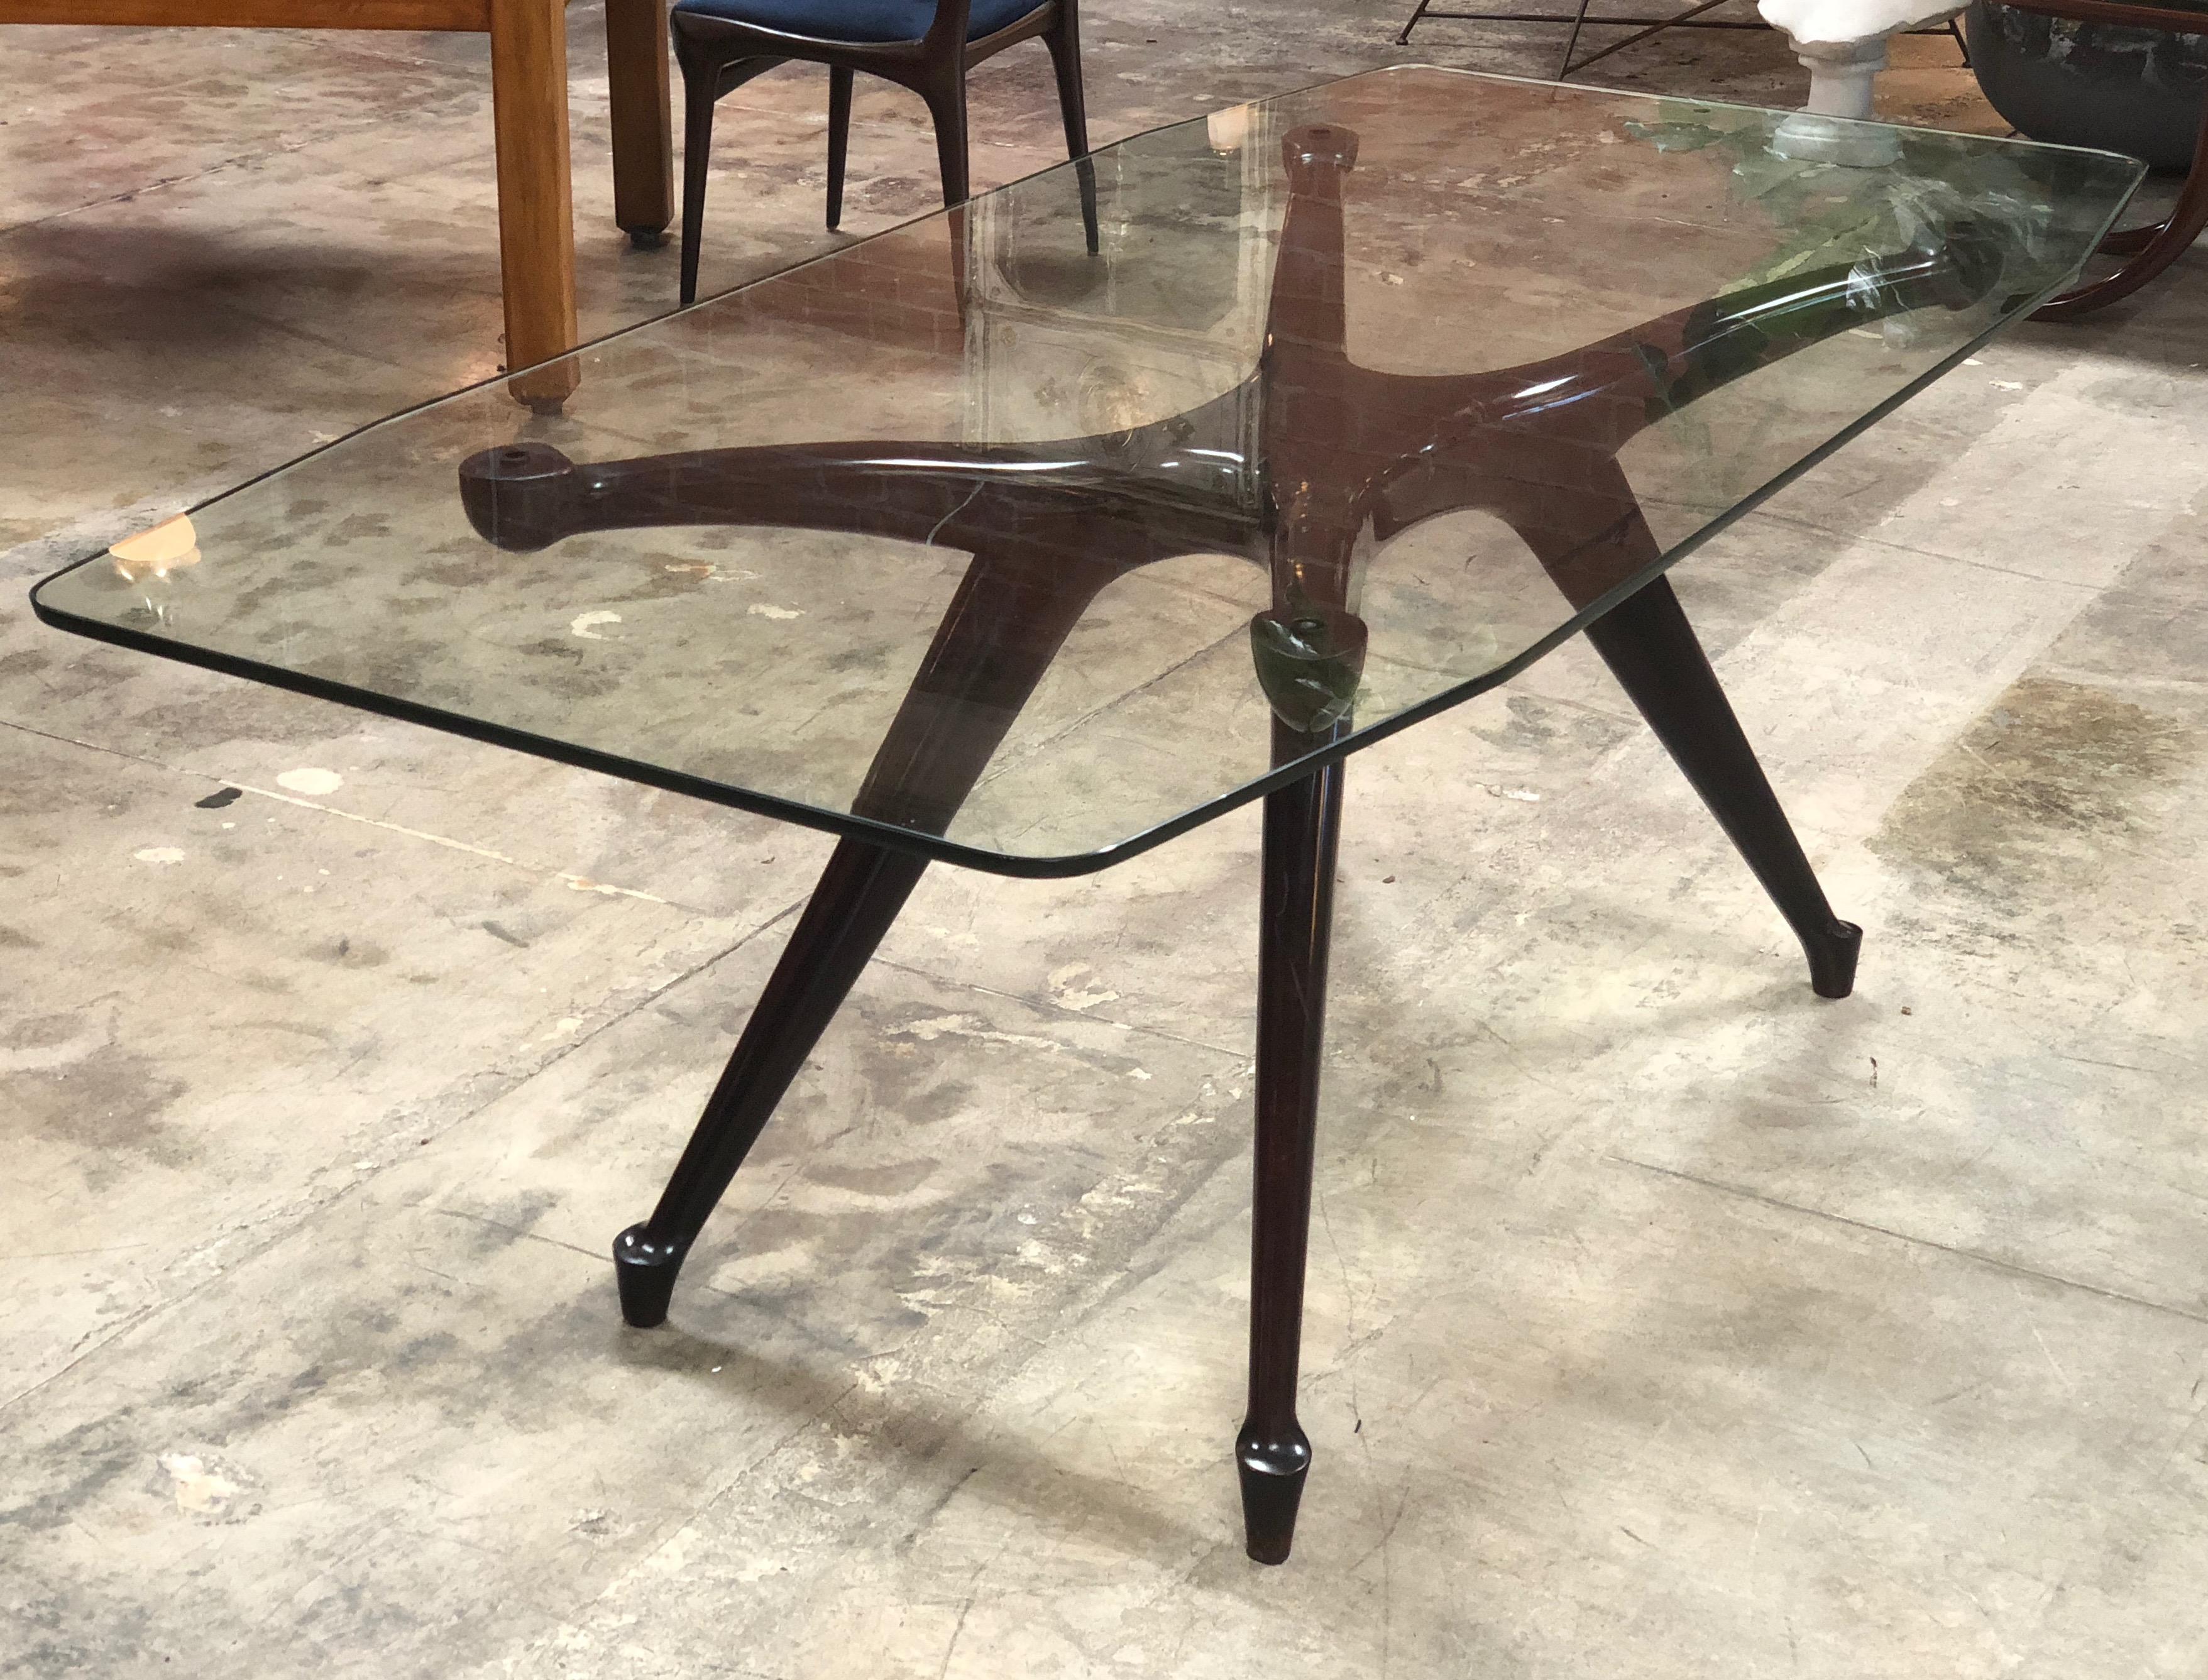 An Italian designed dining table / or could work as a great desk ebonized wood with glass top sculptural legs attributed to Paolo Buffa, circa 1950s.